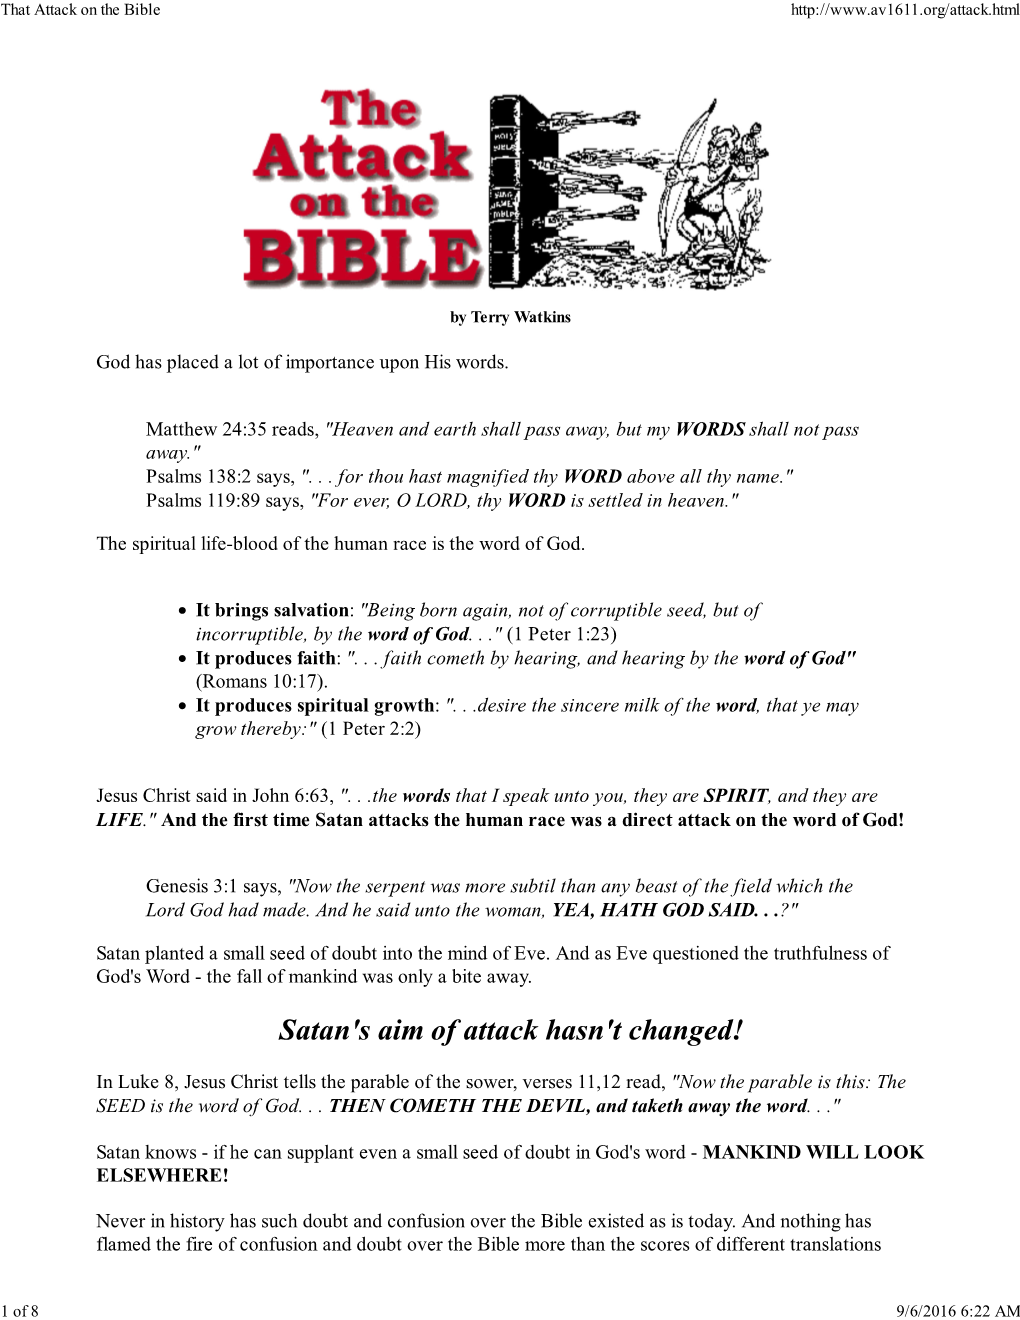 The Attack on the Bible (Pdf)